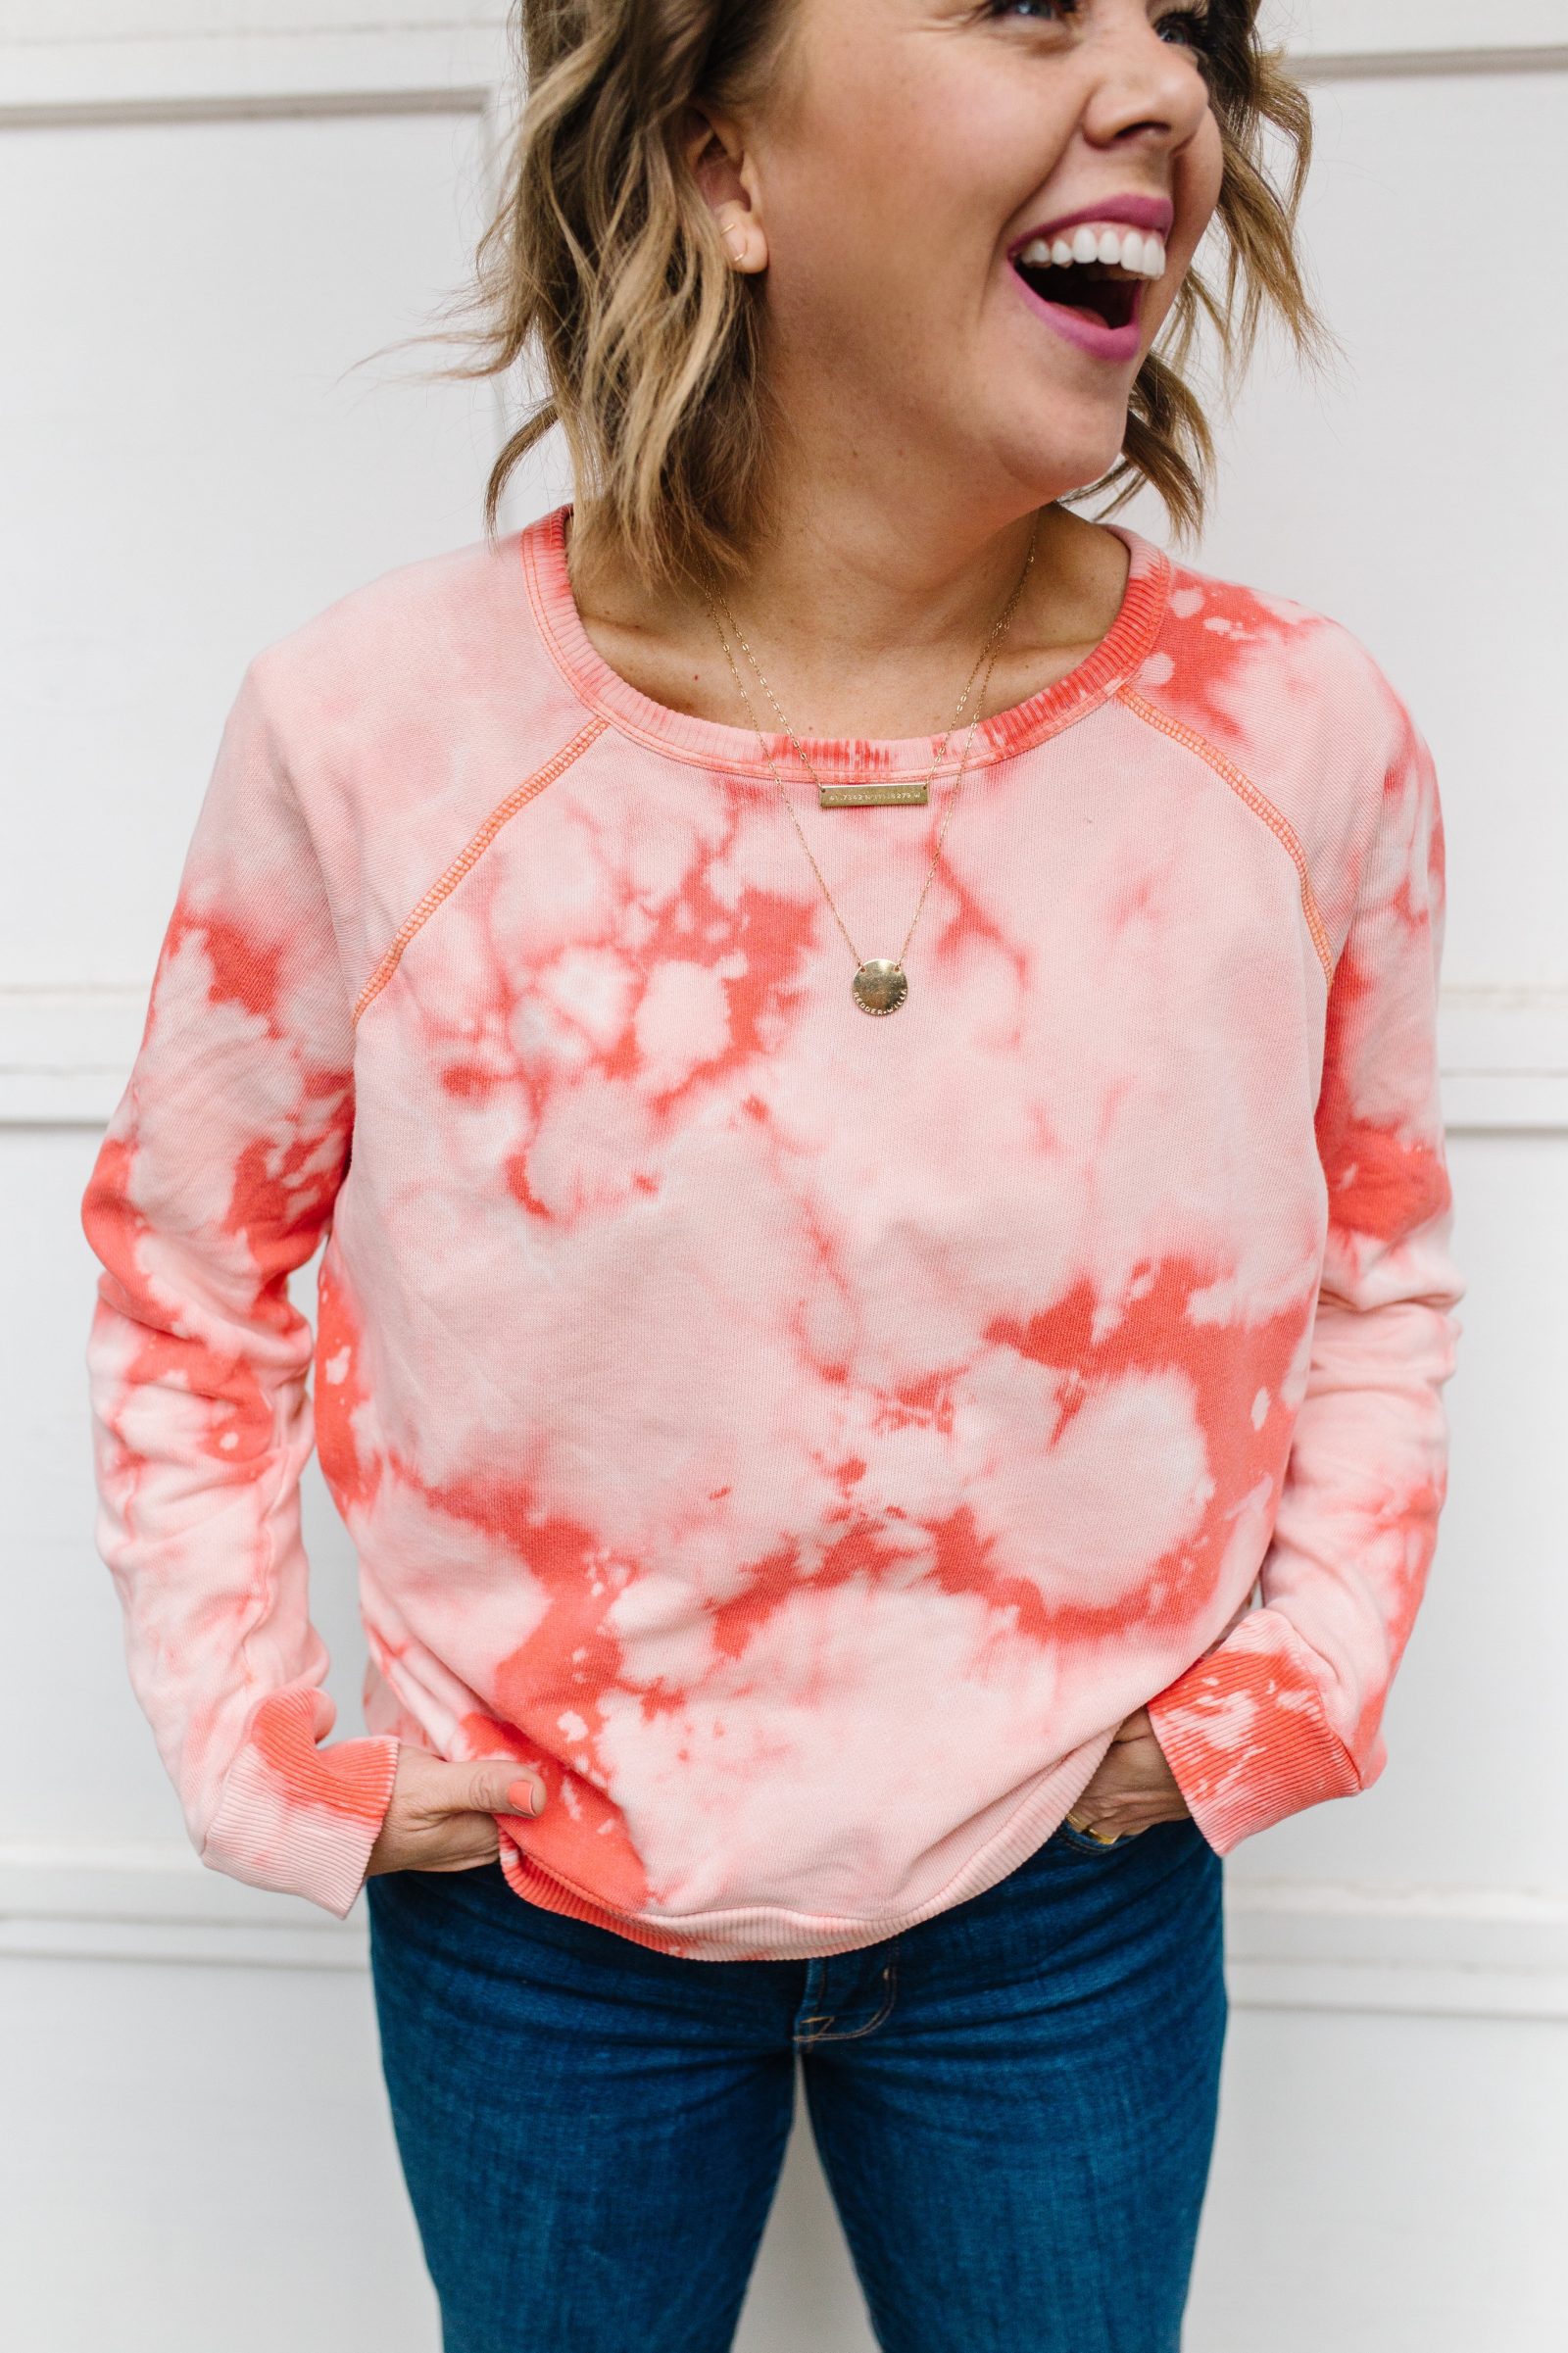 How to Make a Reverse Tie Dye Top + a tutorial featured by Top US Craft Blog + The Pretty Life Girls